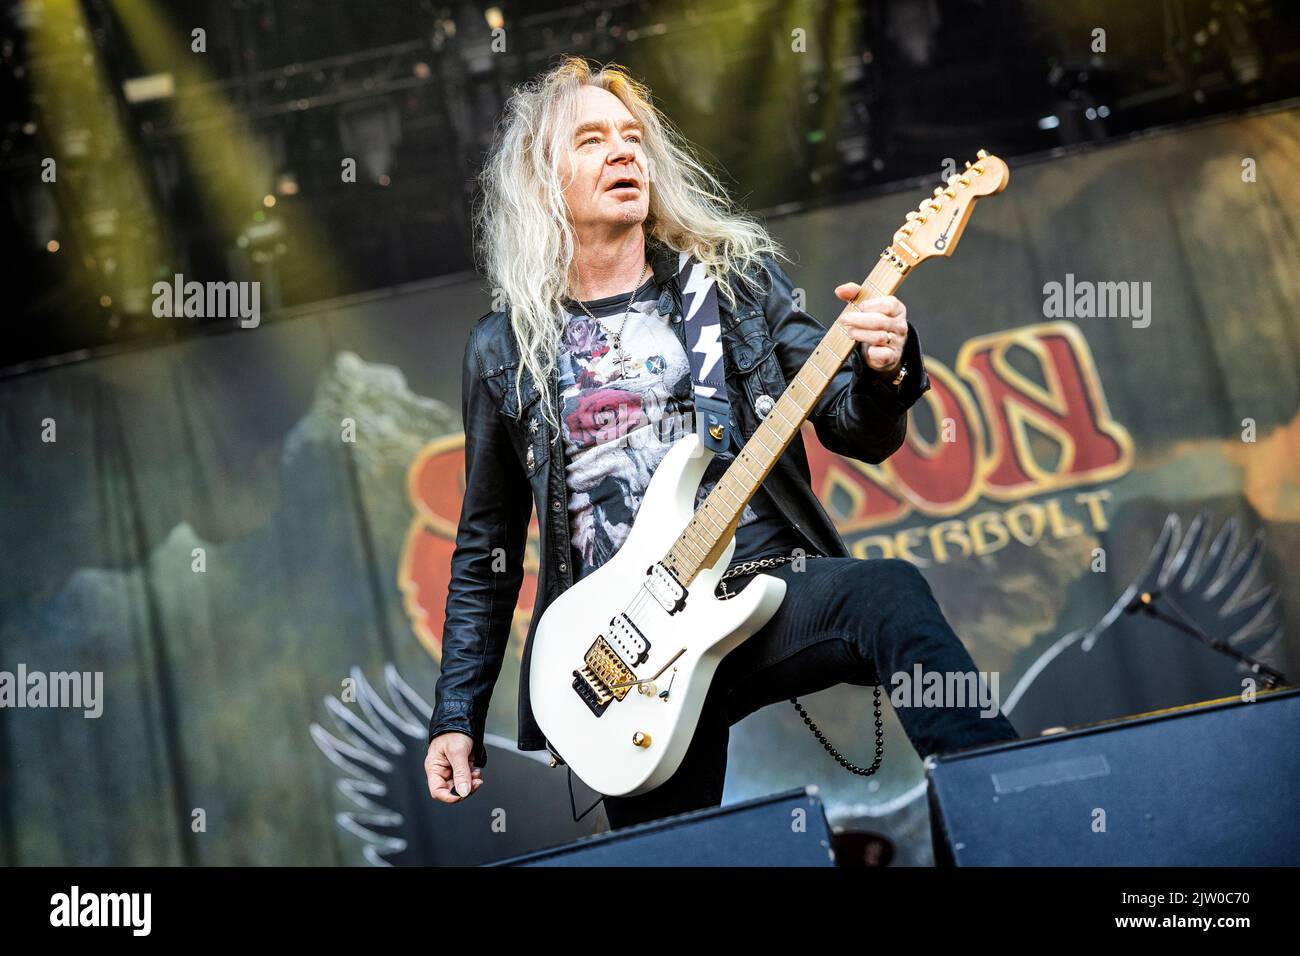 Solvesborg, Sweden. 10th, June 2022. The British heavy metal band Saxon performs a live concert during the Swedish music festival Sweden Rock Festival 2022 in Solvesborg. Here guitarist Doug Scarratt is seen live on stage. (Photo credit: Gonzales Photo - Terje Dokken). Stock Photo